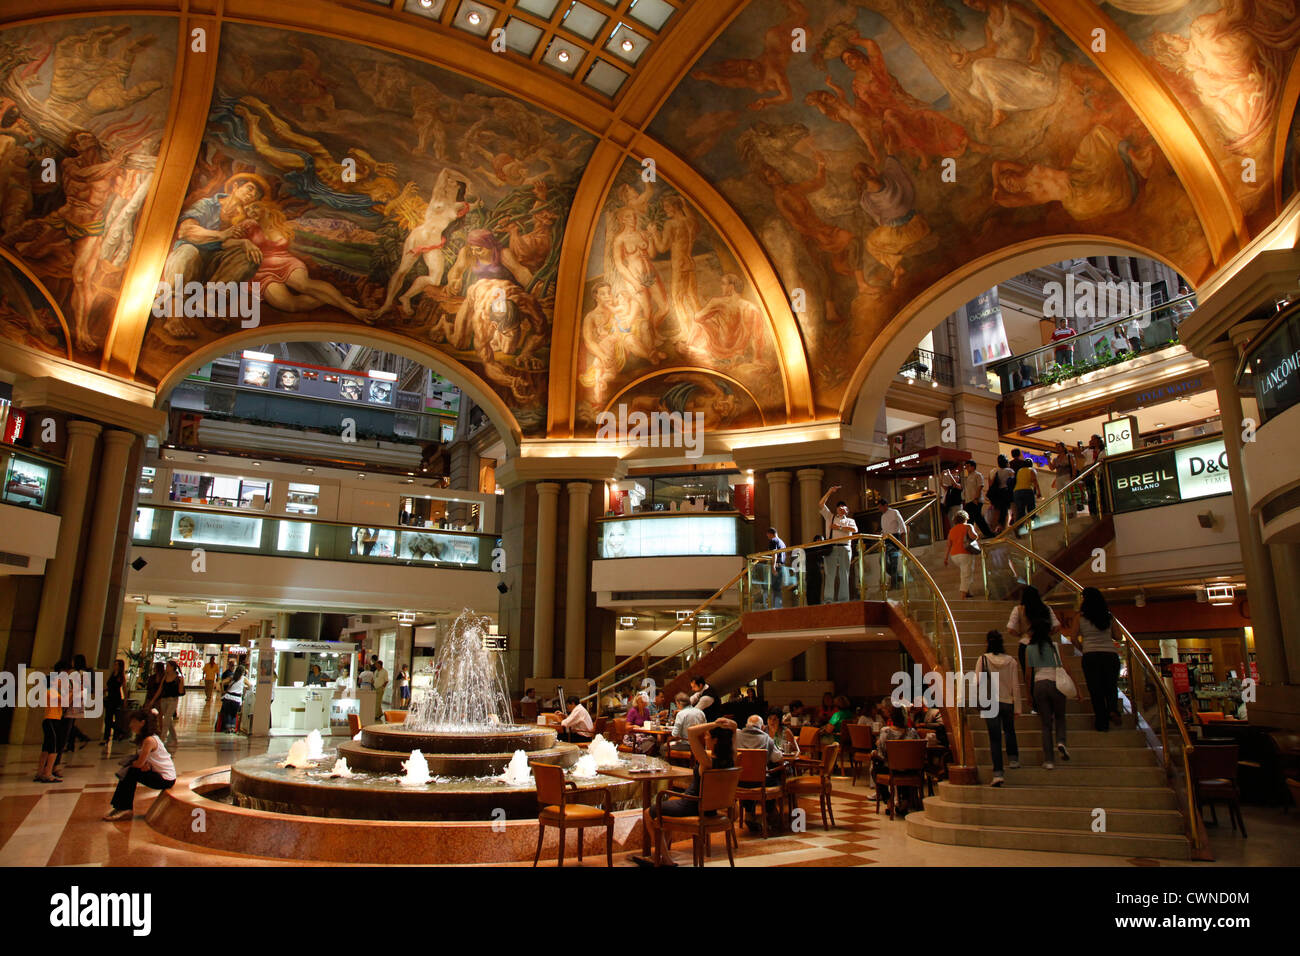 Galerias Pacifico-Shopping-Mall in Florida Street, Buenos Aires, Argentinien. Stockfoto